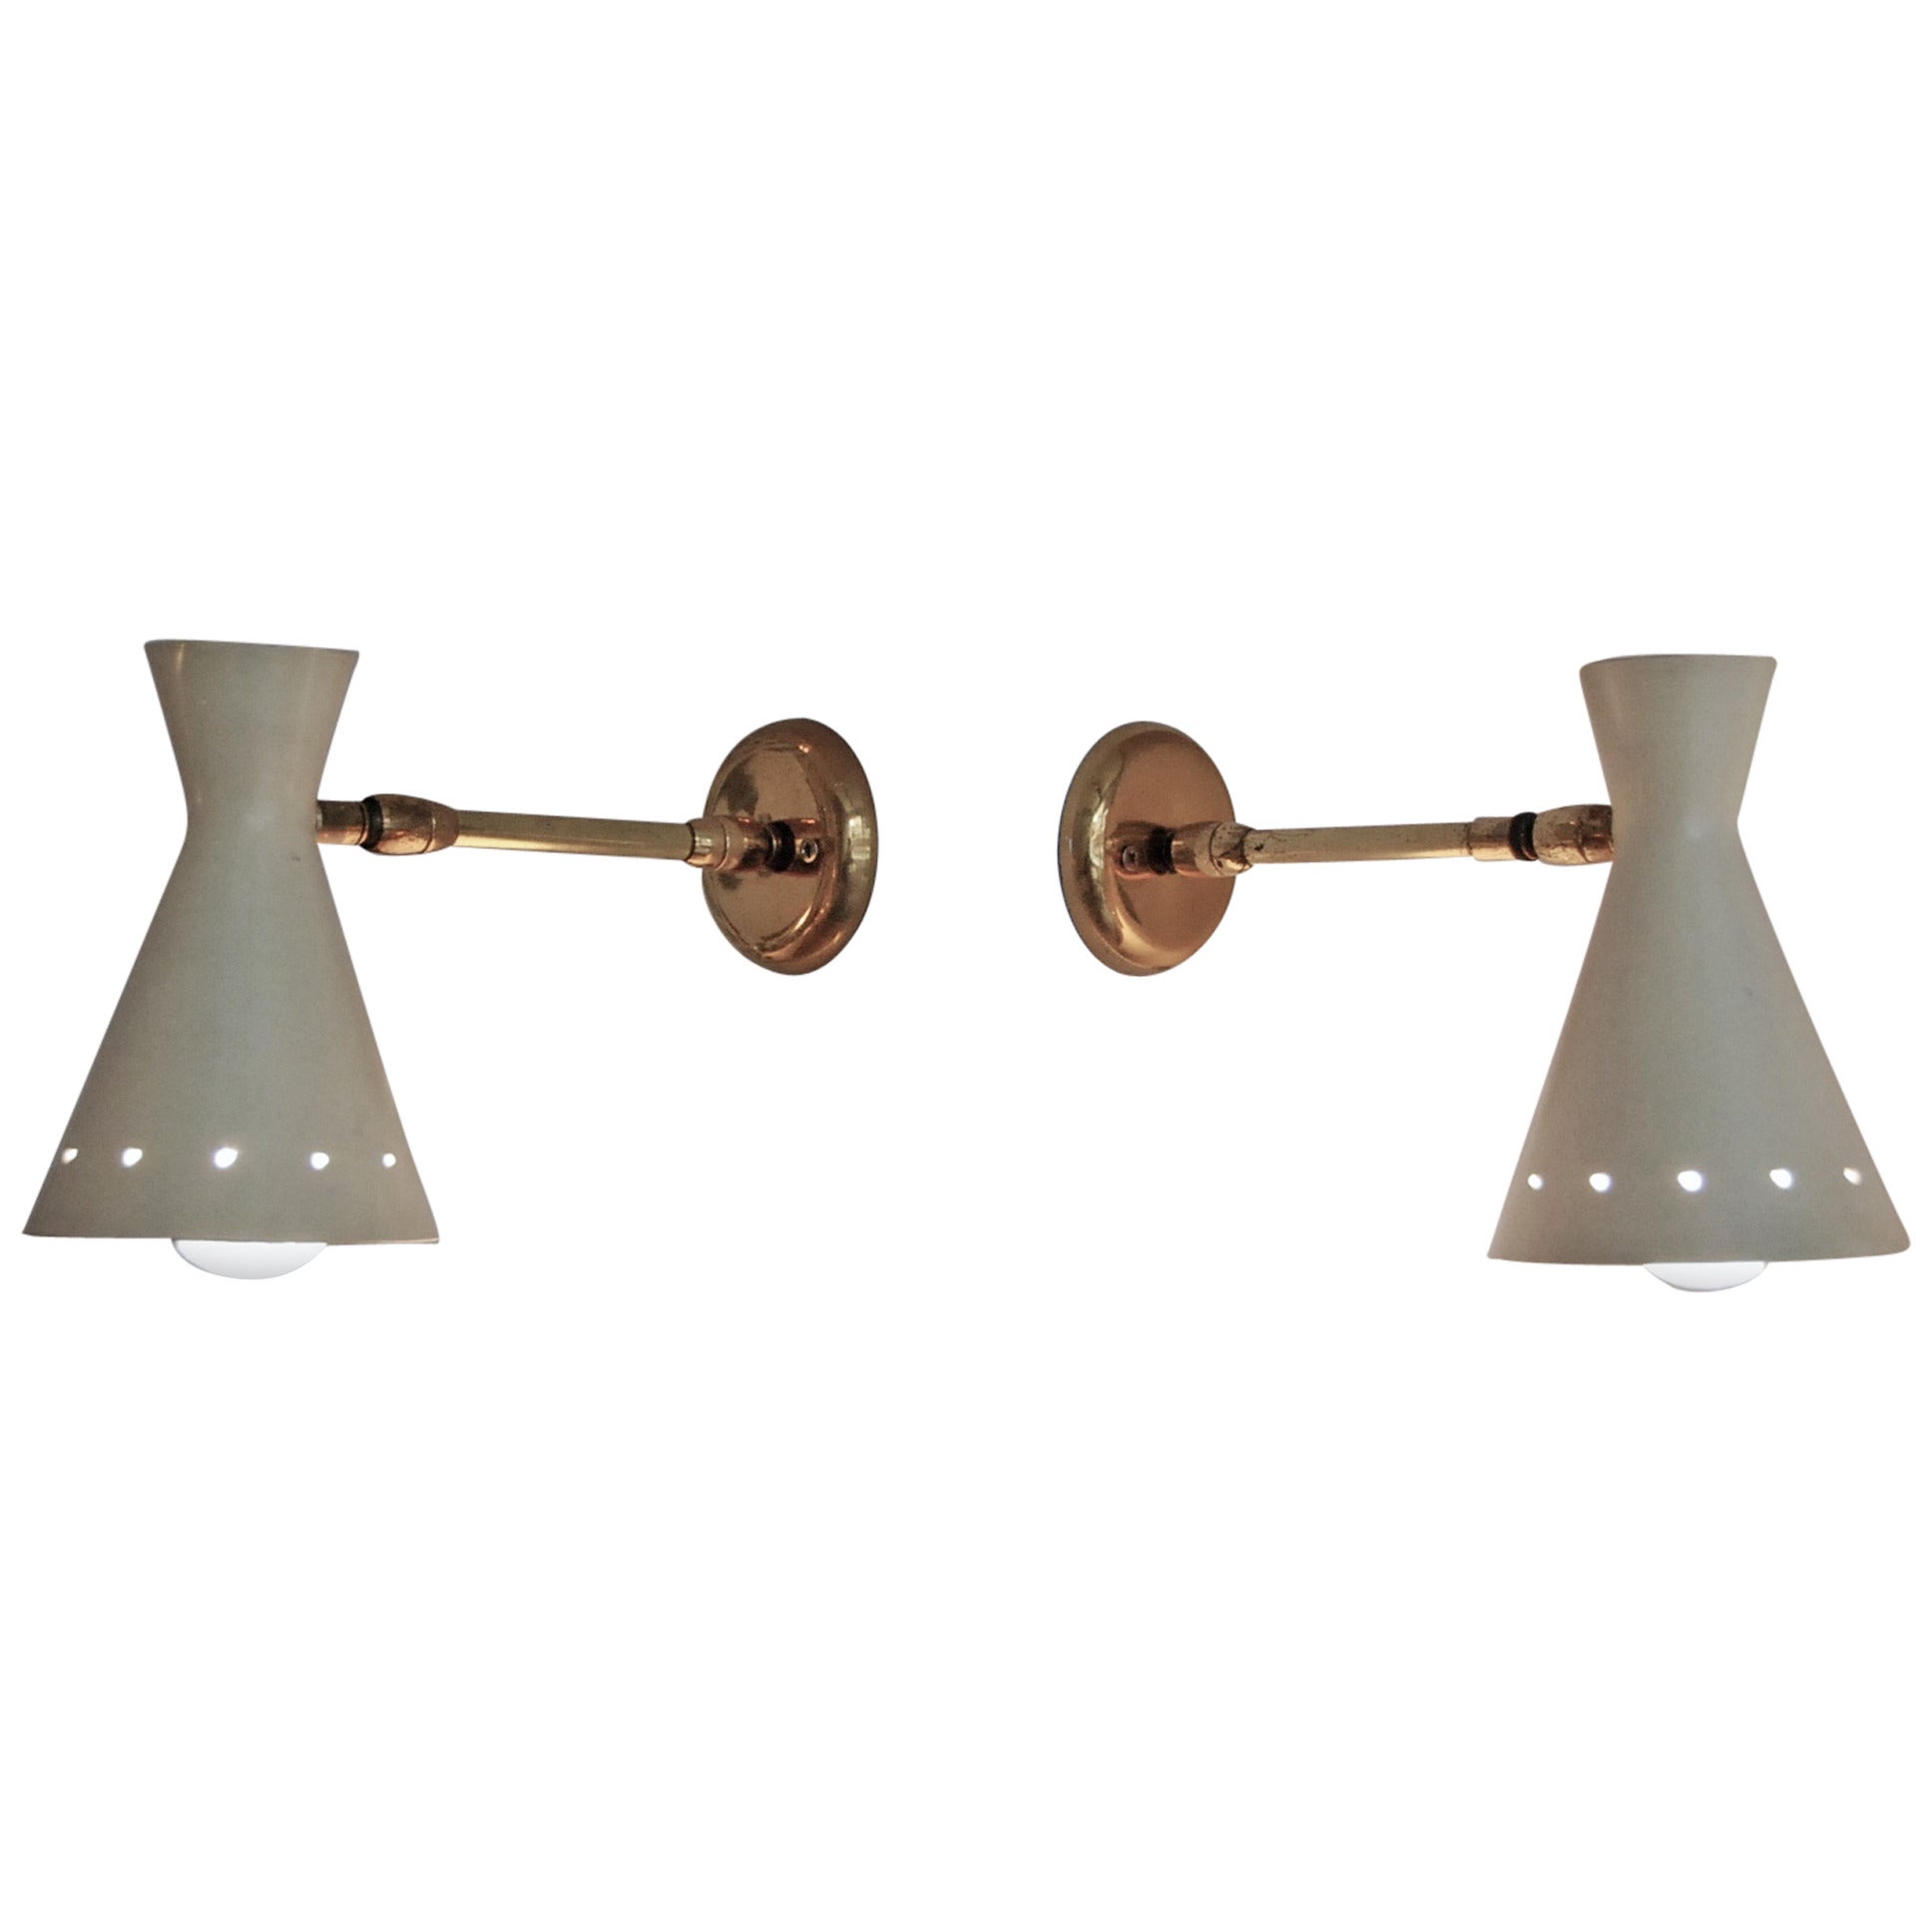 Pair of wall lamps in the style of stilnovo